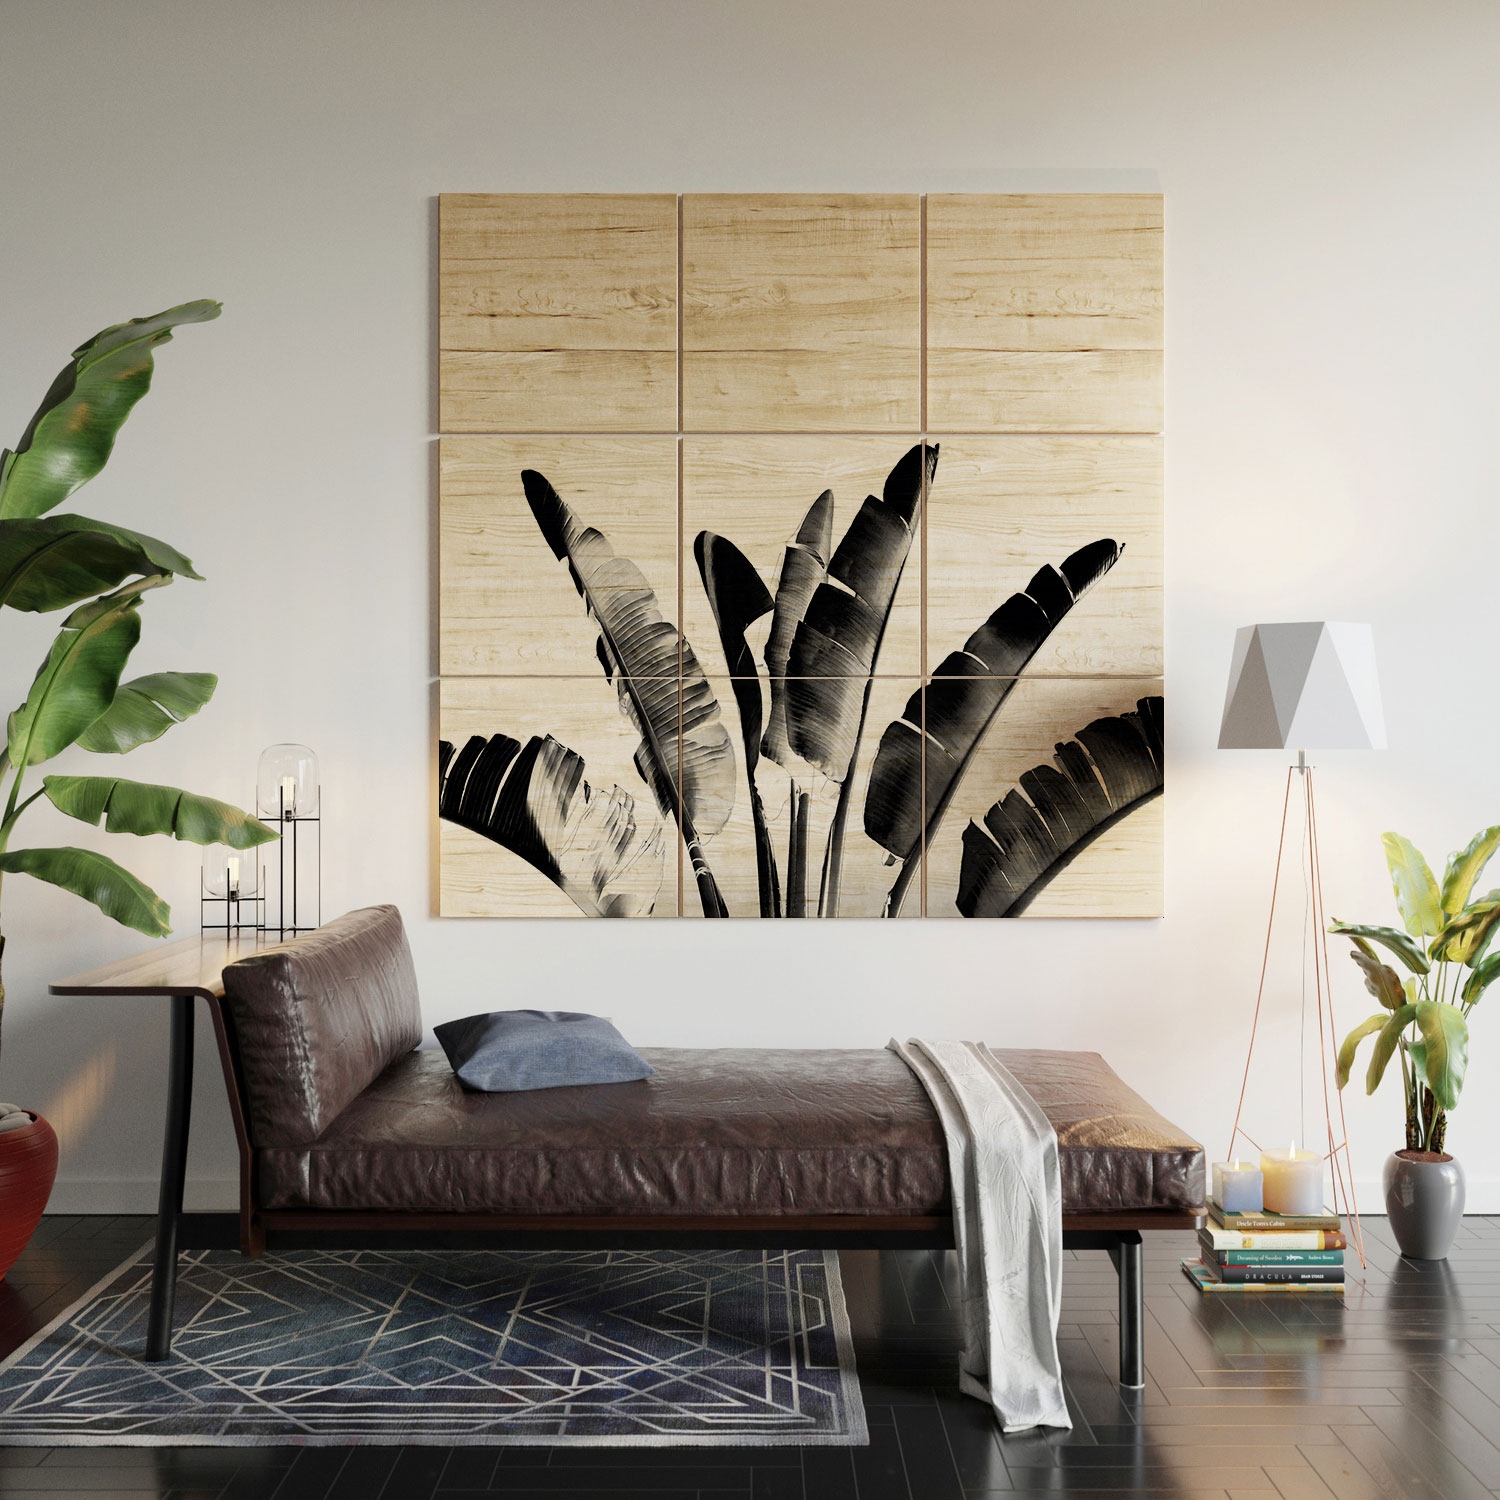 Traveler Palm Bw by Gale Switzer - Wood Wall Mural5' x 5' (Nine 20" wood Squares) - Image 4